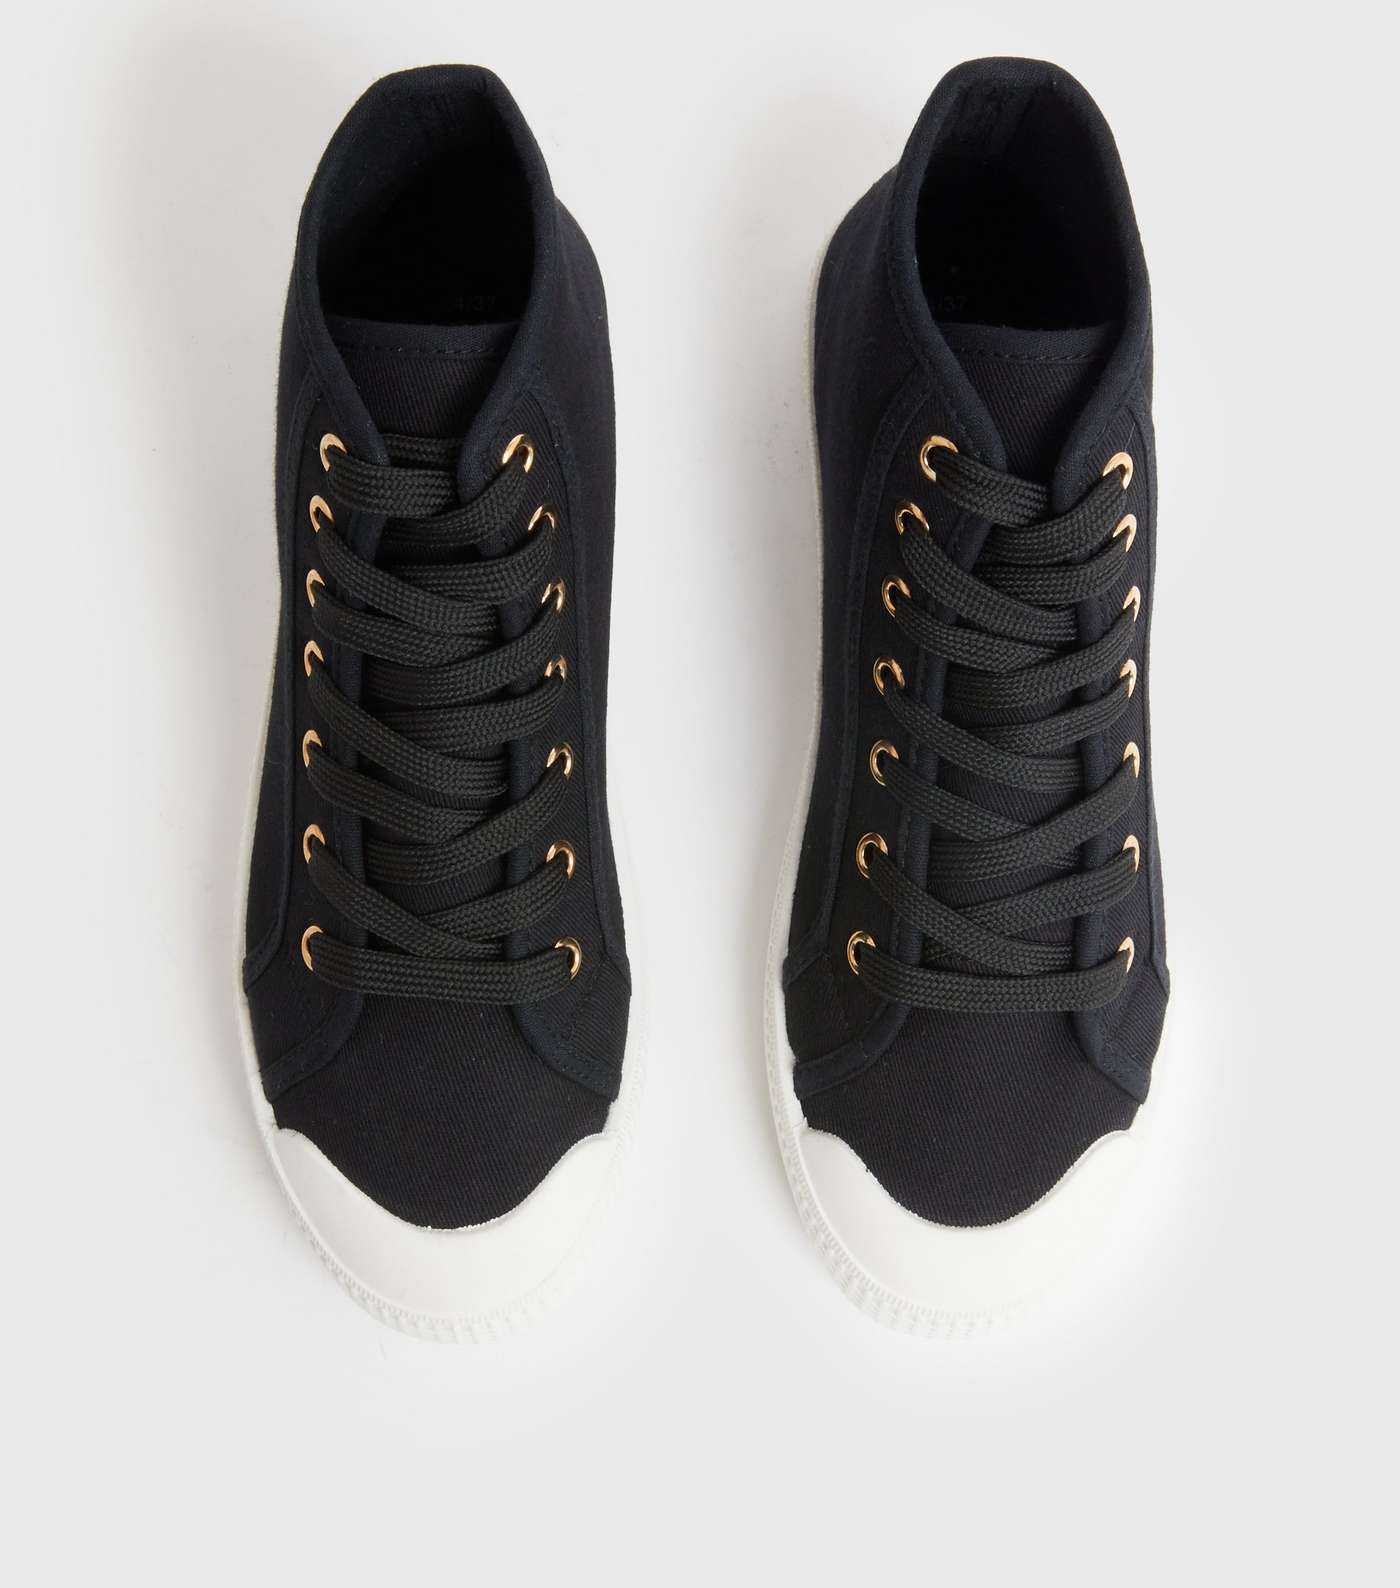 Black Canvas Lace Up High Top Trainers Image 3